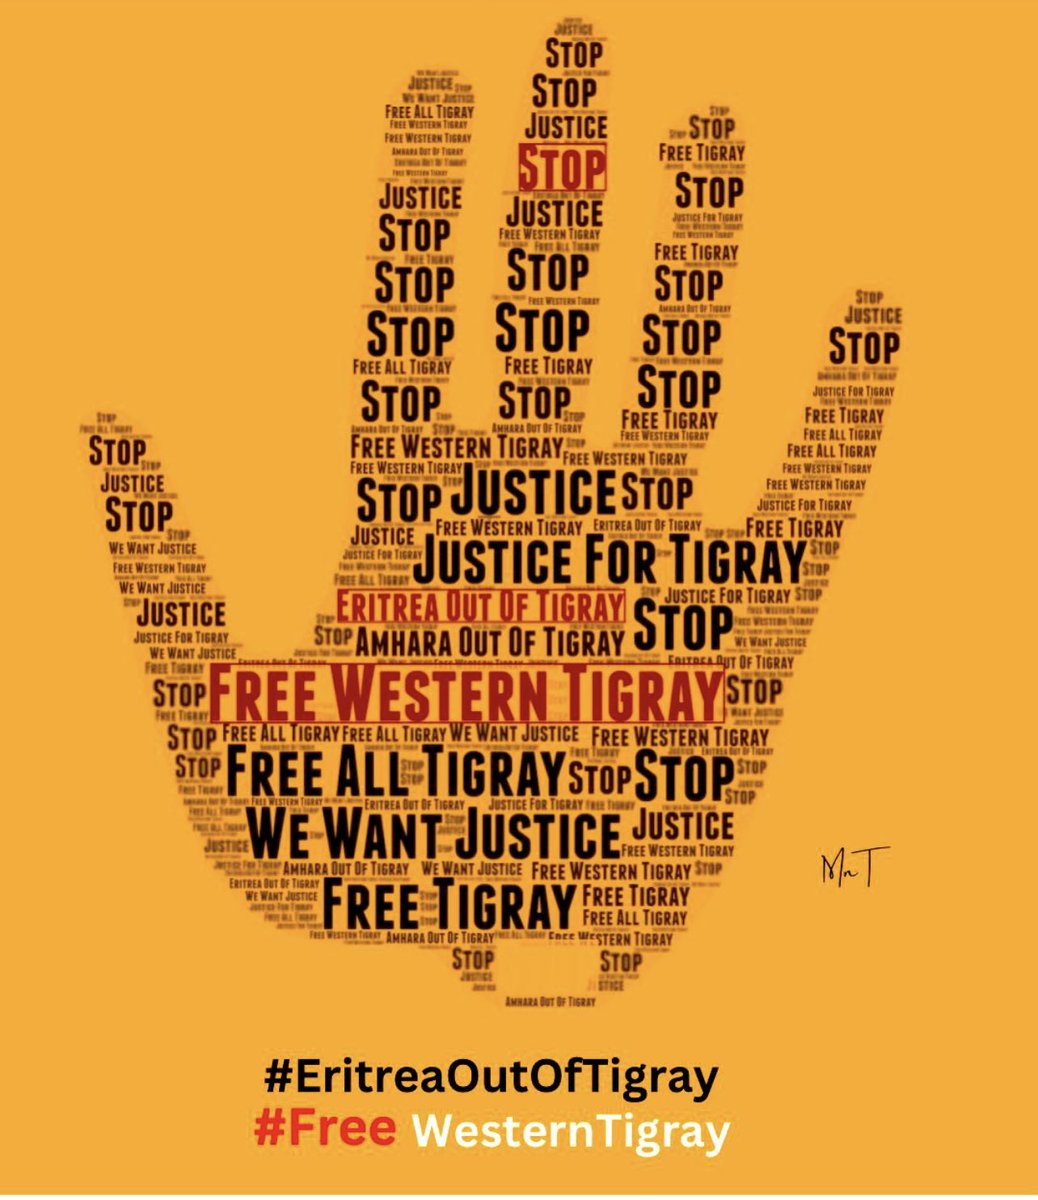 #WesternTigray is  yet occupied by Amhra militias . WORLD LEADERS must take action to bring back the 70,000 plus Tigray’s refugees in #Sudan to their homes. #BringBackTigrayRefueegs 

@UN @hrw @Refugees @EUCouncil @POTUS @SecBlinken @IntlCrimCourt ⁦@_AfricanUnion⁩